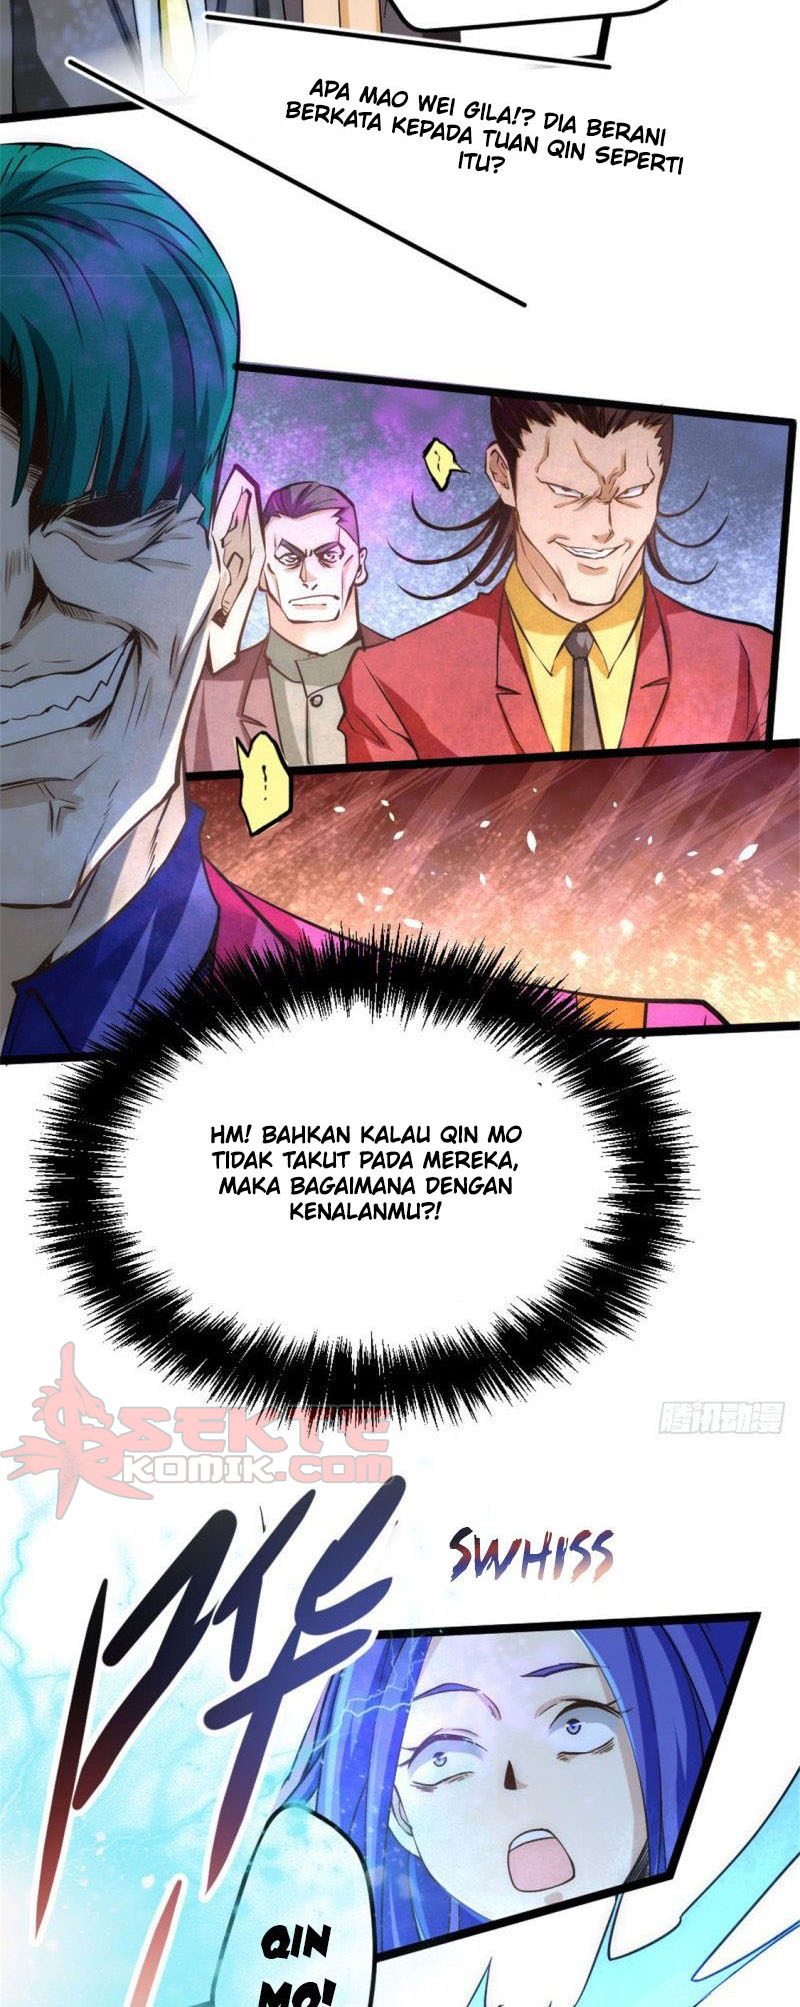 Almighty Master Chapter 68